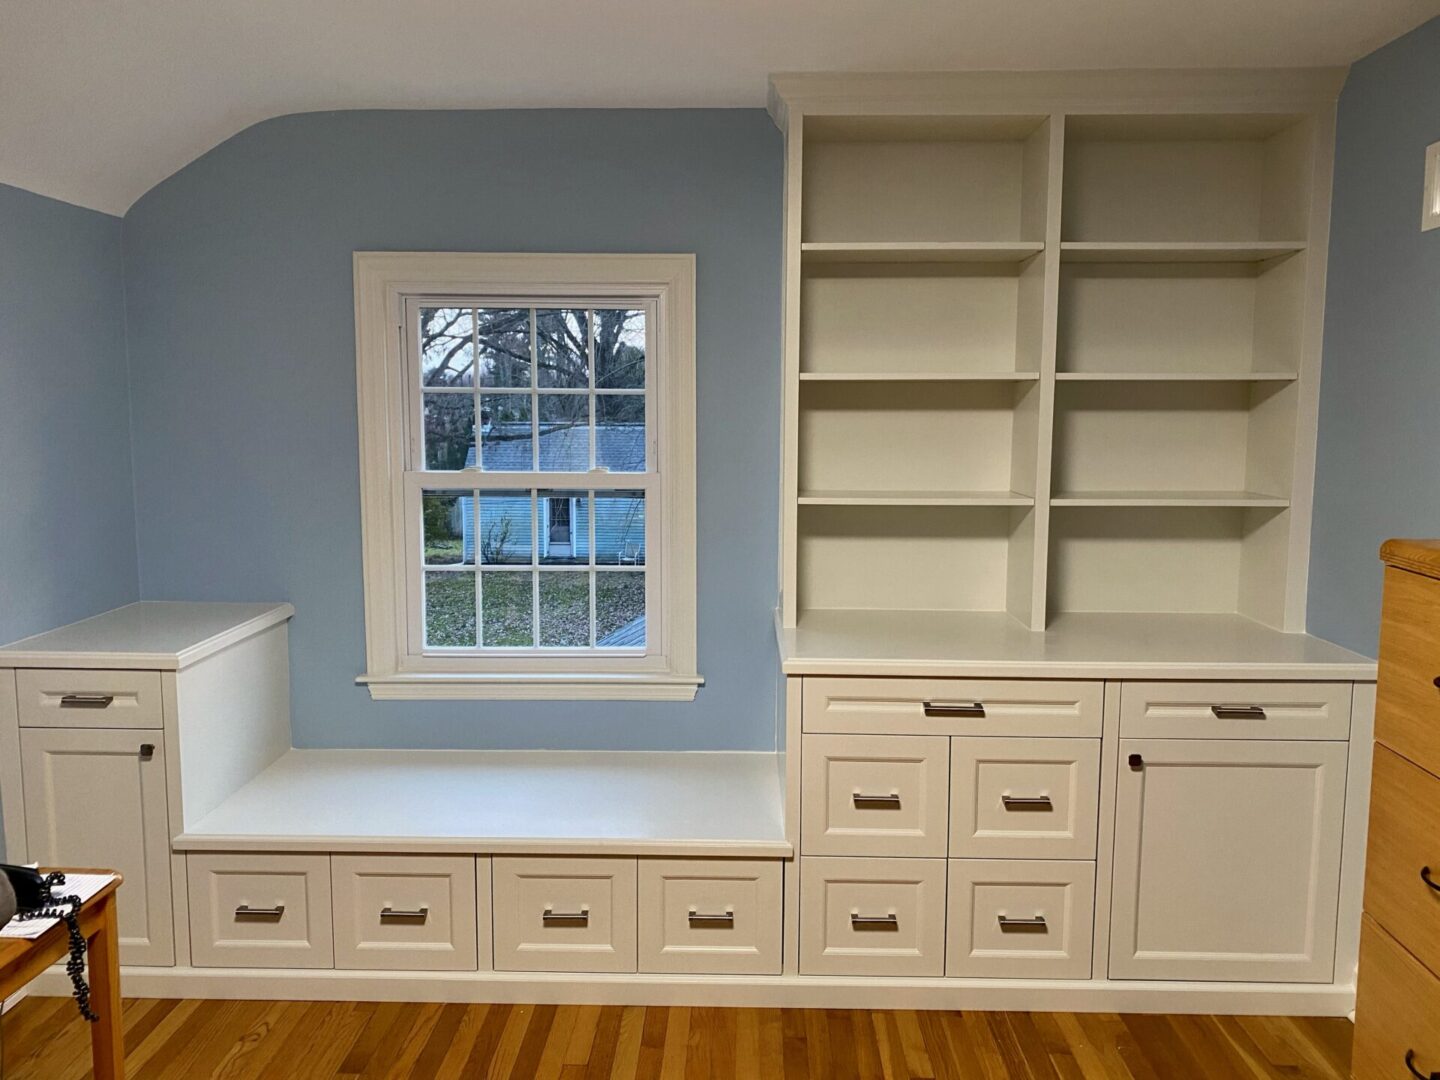 A White Color Cupboard With Drawers at the Bottom